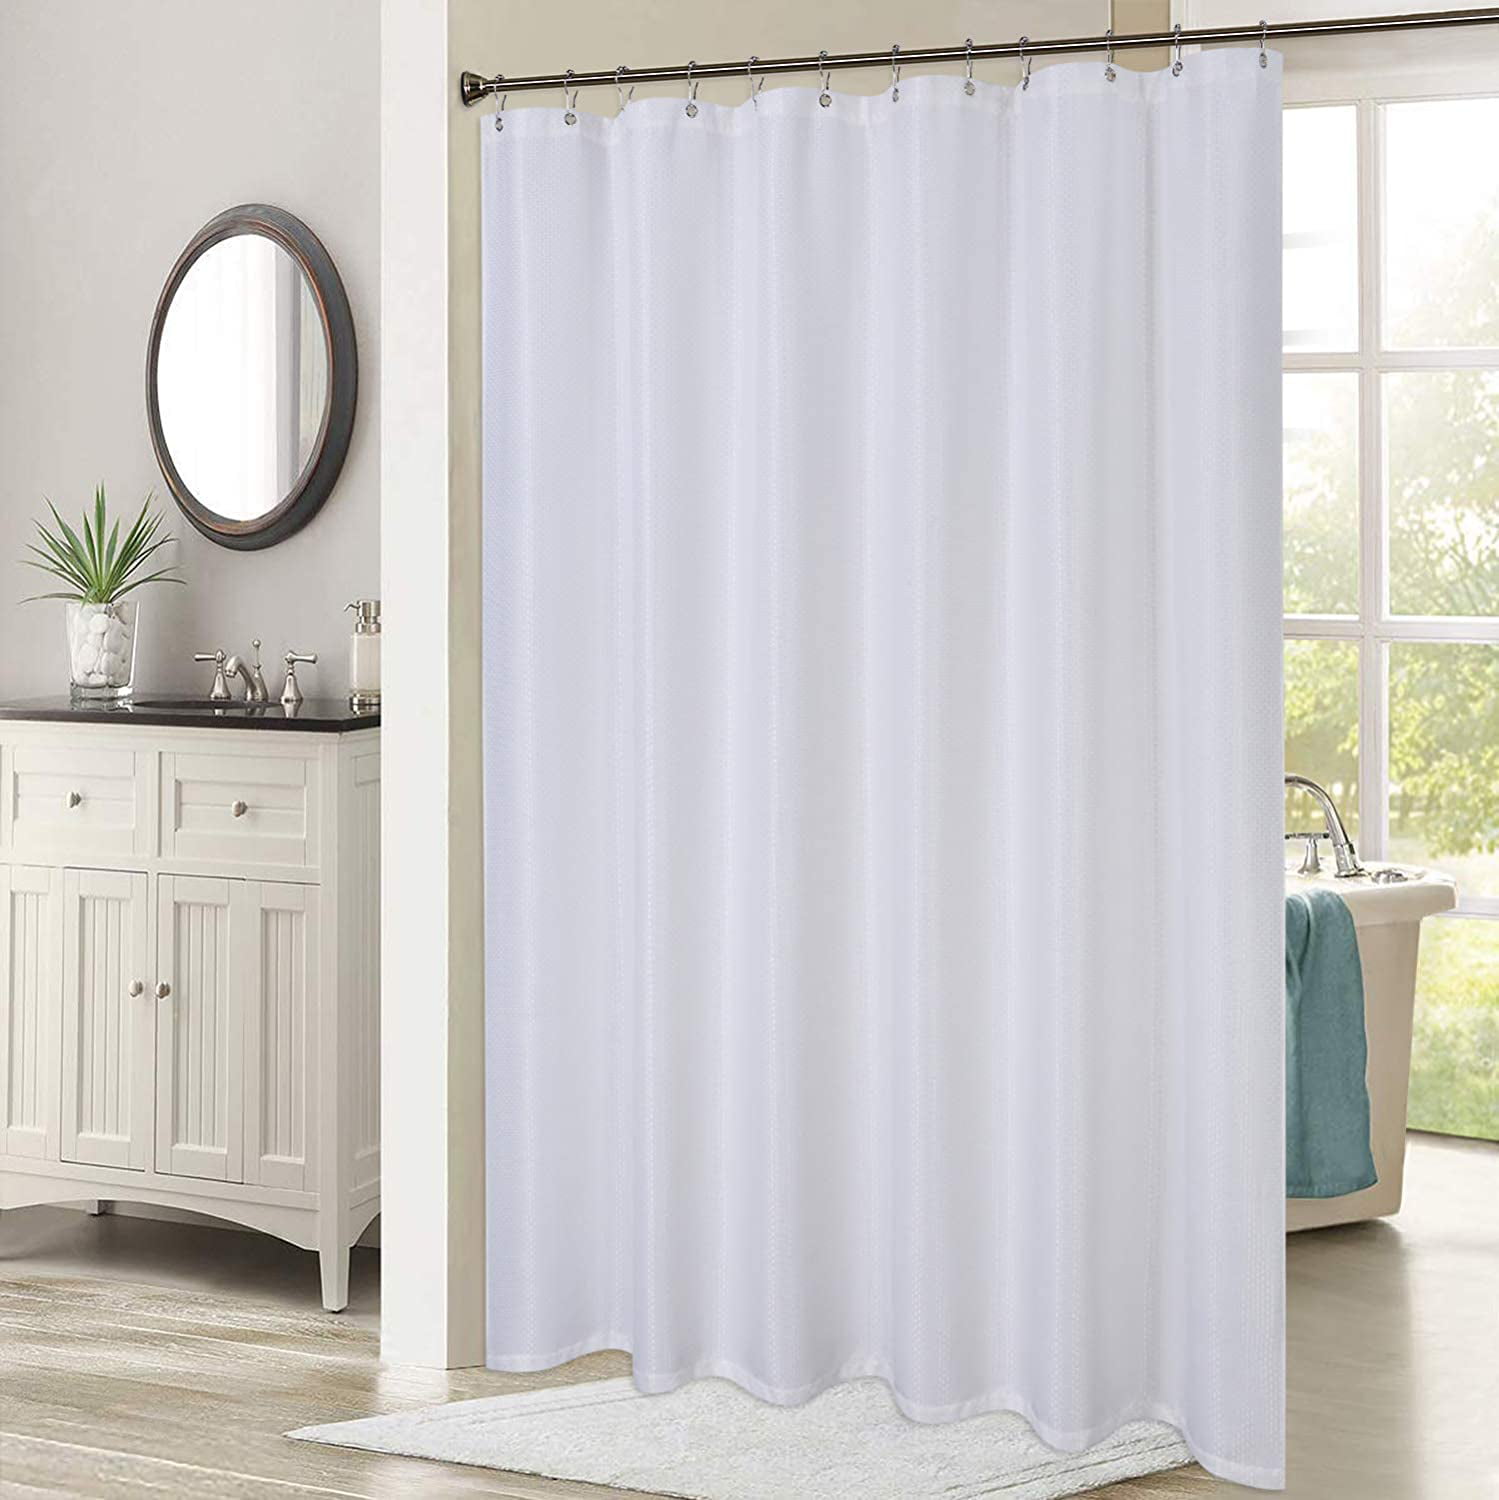 Caromio Shower Curtains 78 Inches Long, Are There Shower Curtains Longer Than 72